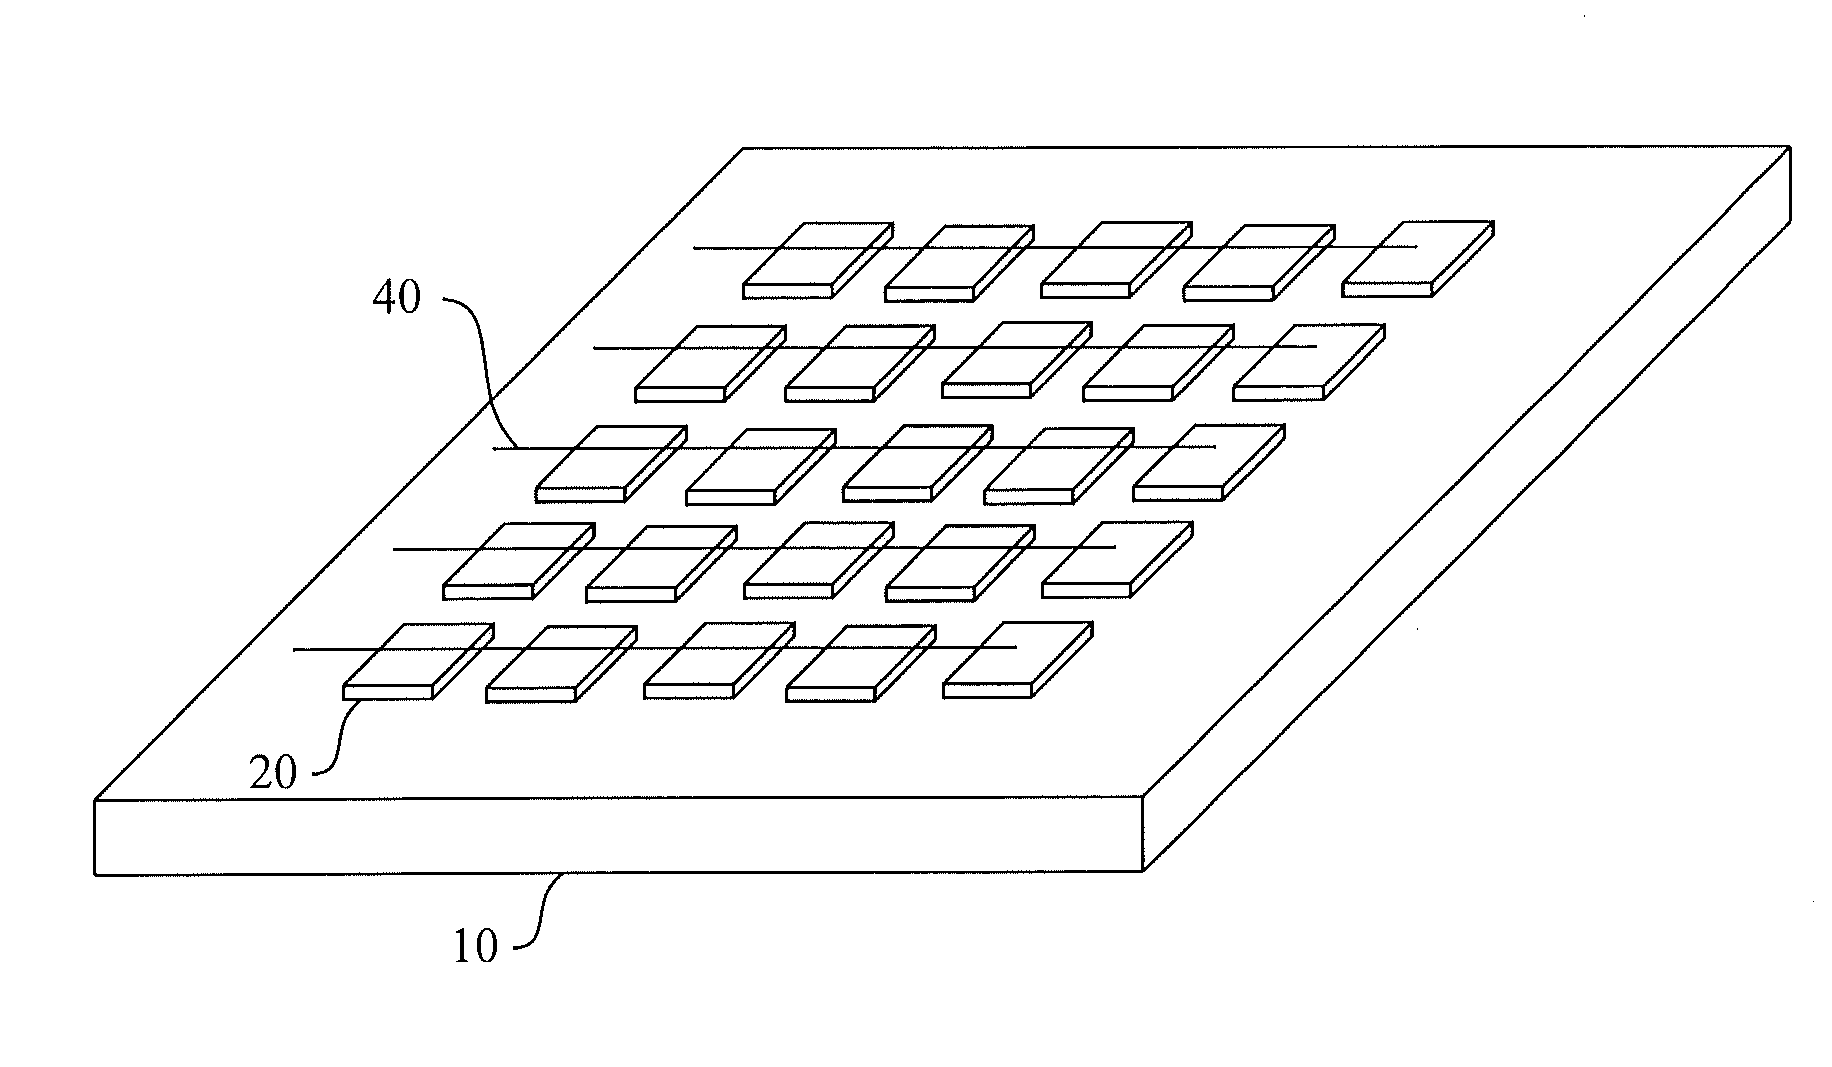 Interconnection structures and methods for transfer-printed integrated circuit elements with improved interconnection alignment tolerance